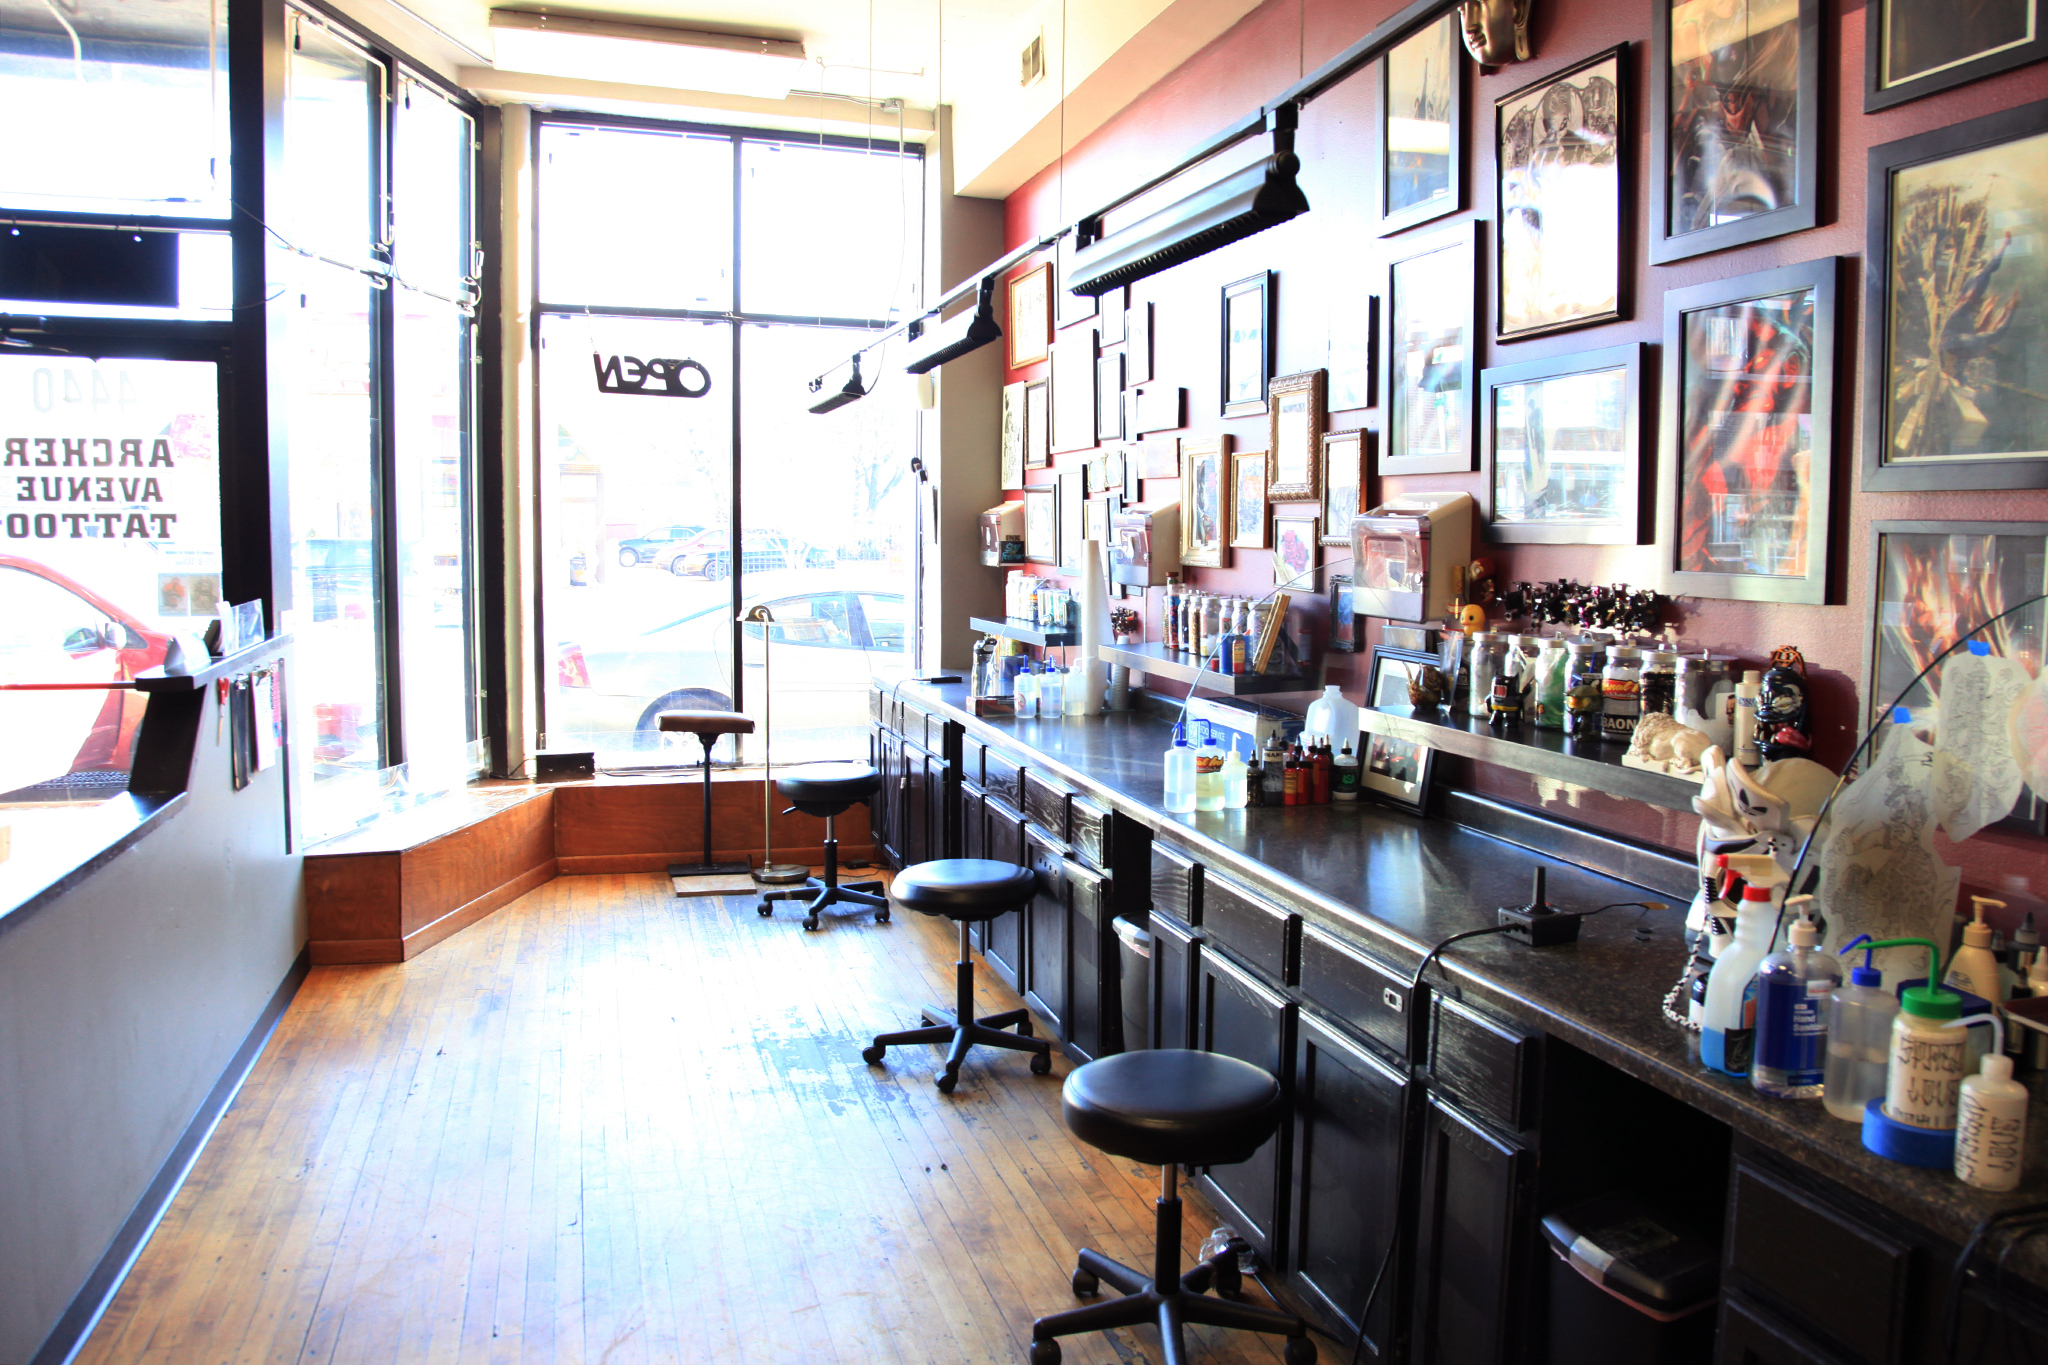 Tattoo shops for flash art, photorealism and more types of ink